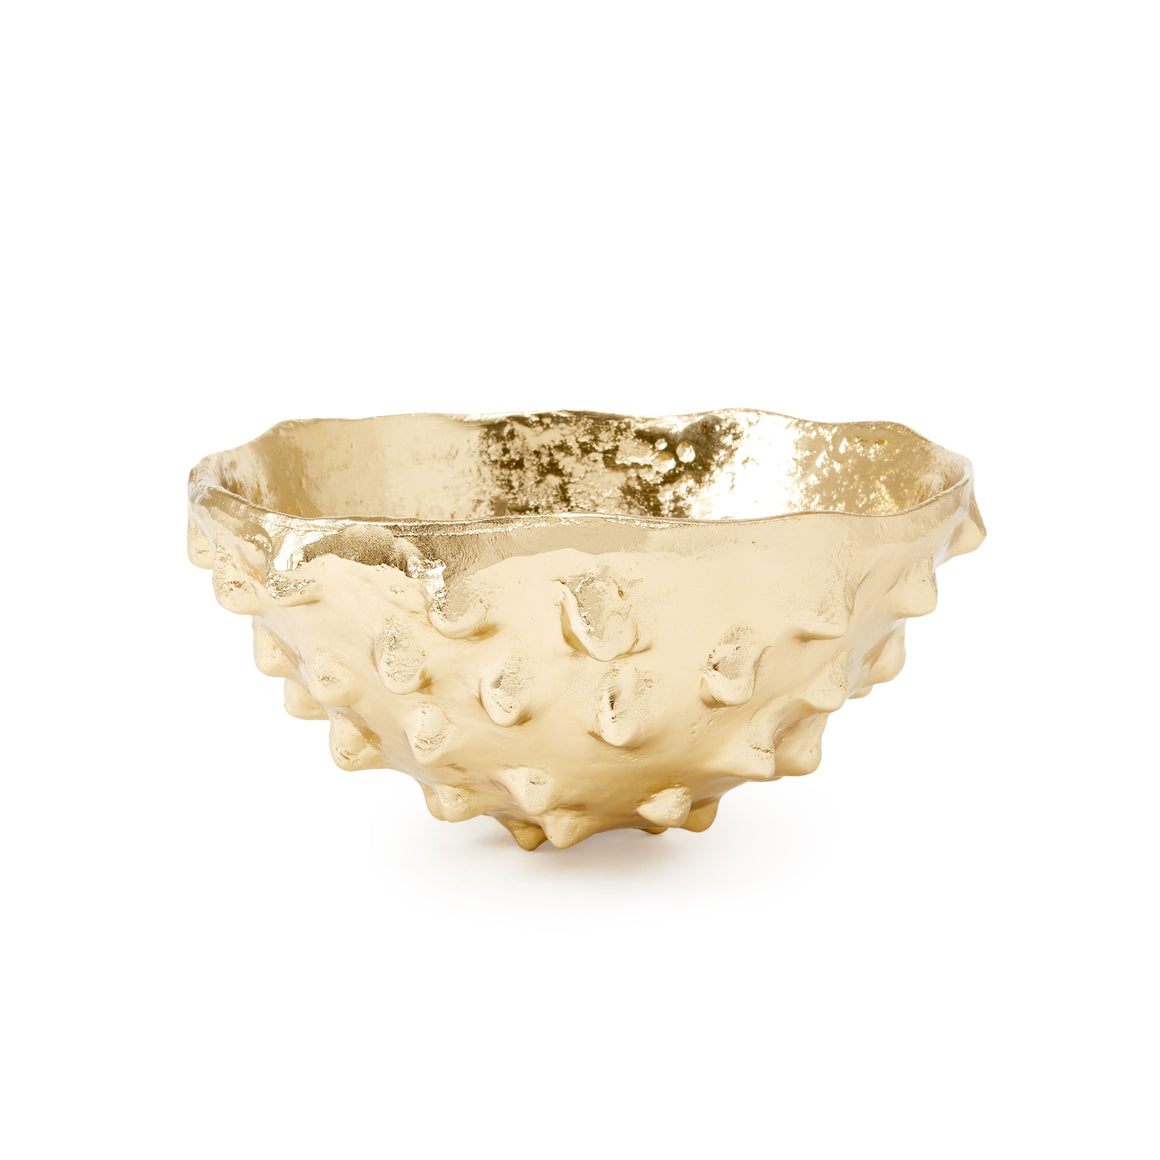 Organic Cast Metal Bowl in Polished Brass | Kiwano Collection | Villa & House